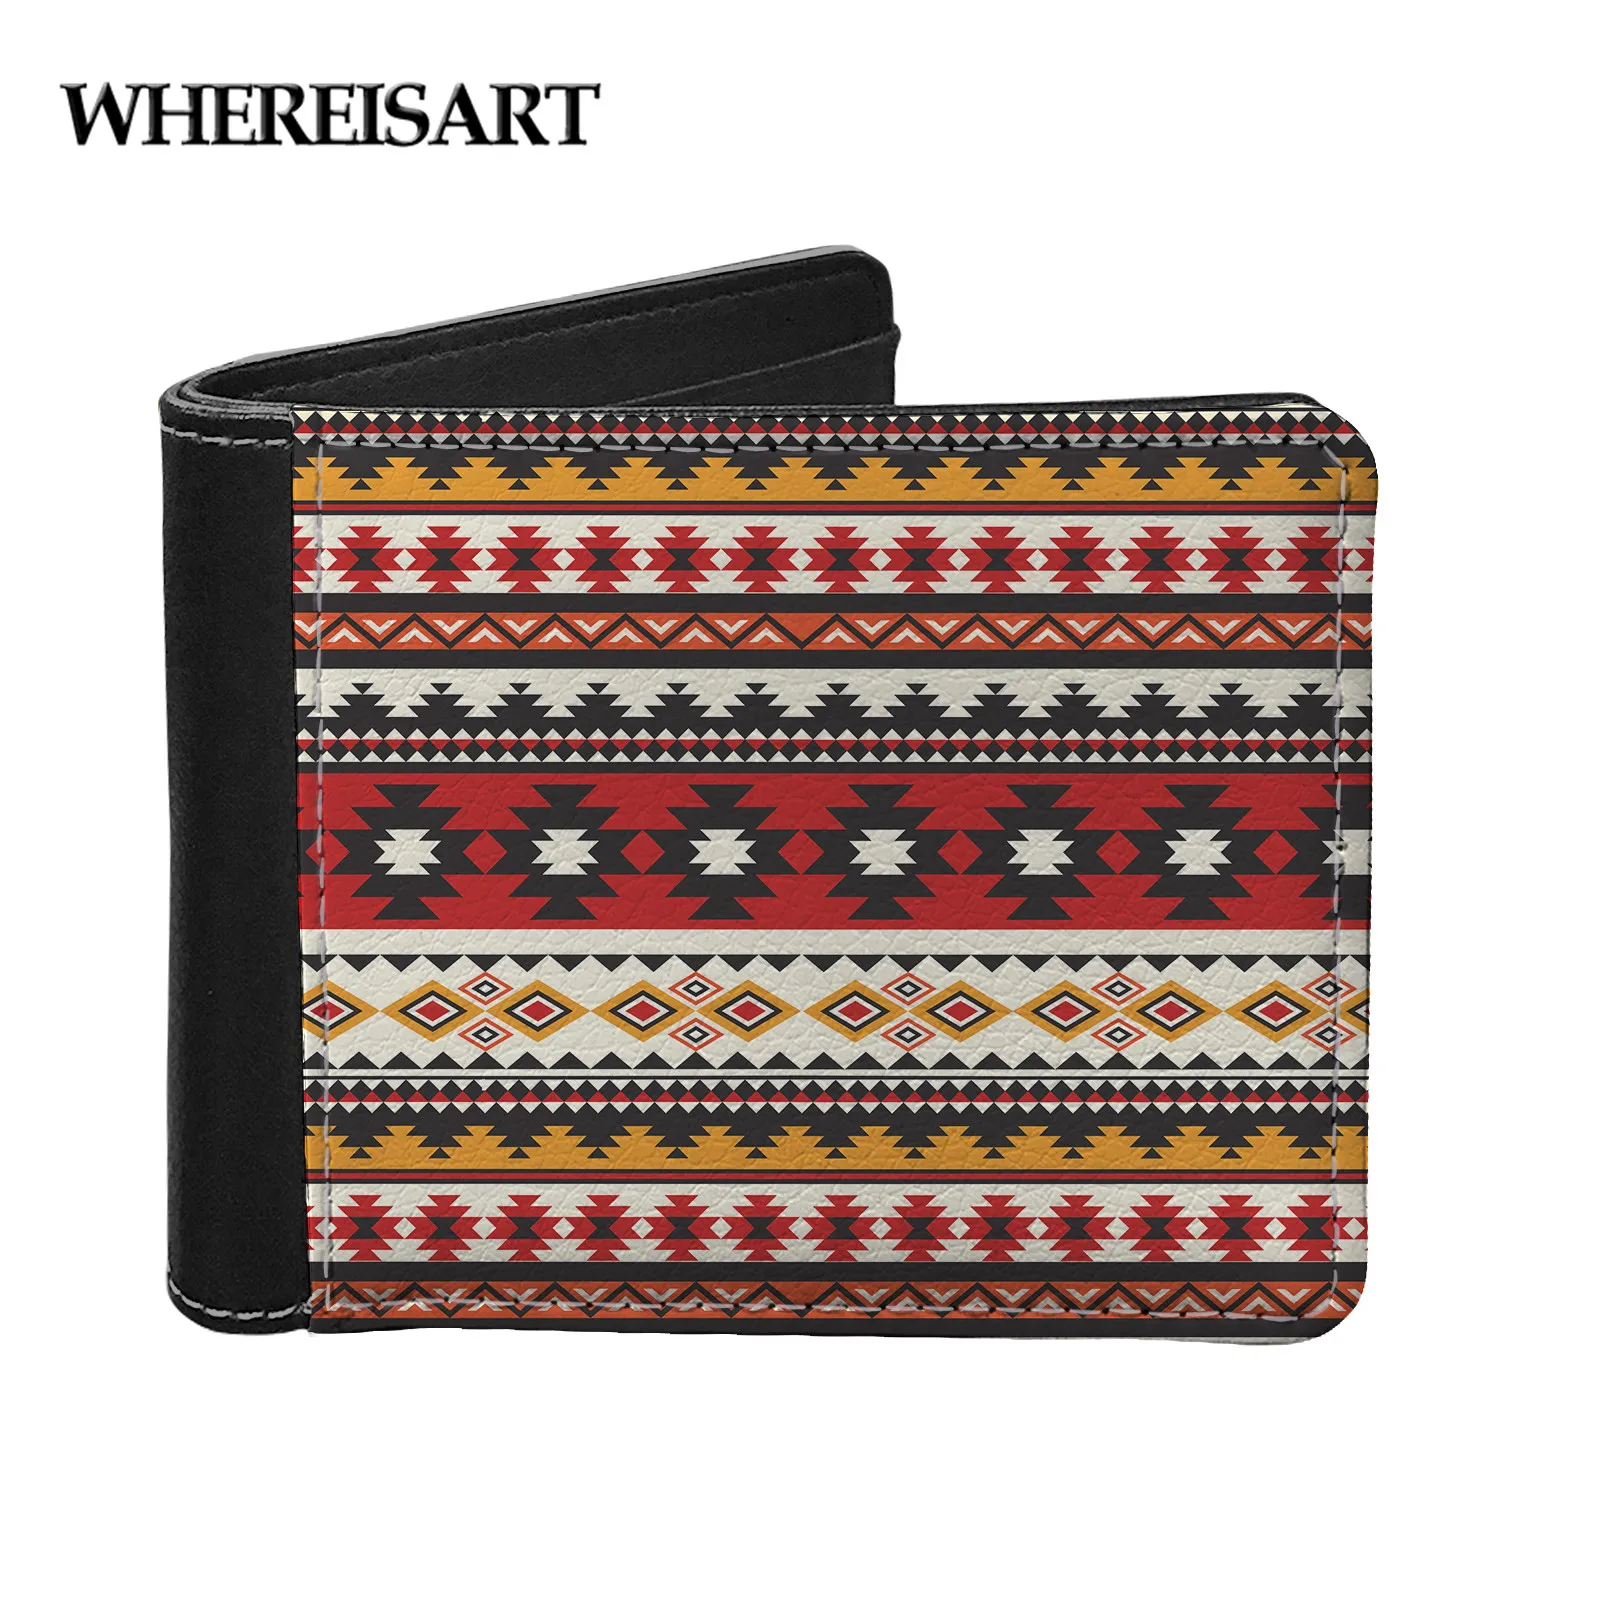 

WHEREISART Ethnic Tribal Printed Women ID Bank Card Holder PU Leather Men Moneyclip Wallet Small Coin Purse for Male Porte Carte